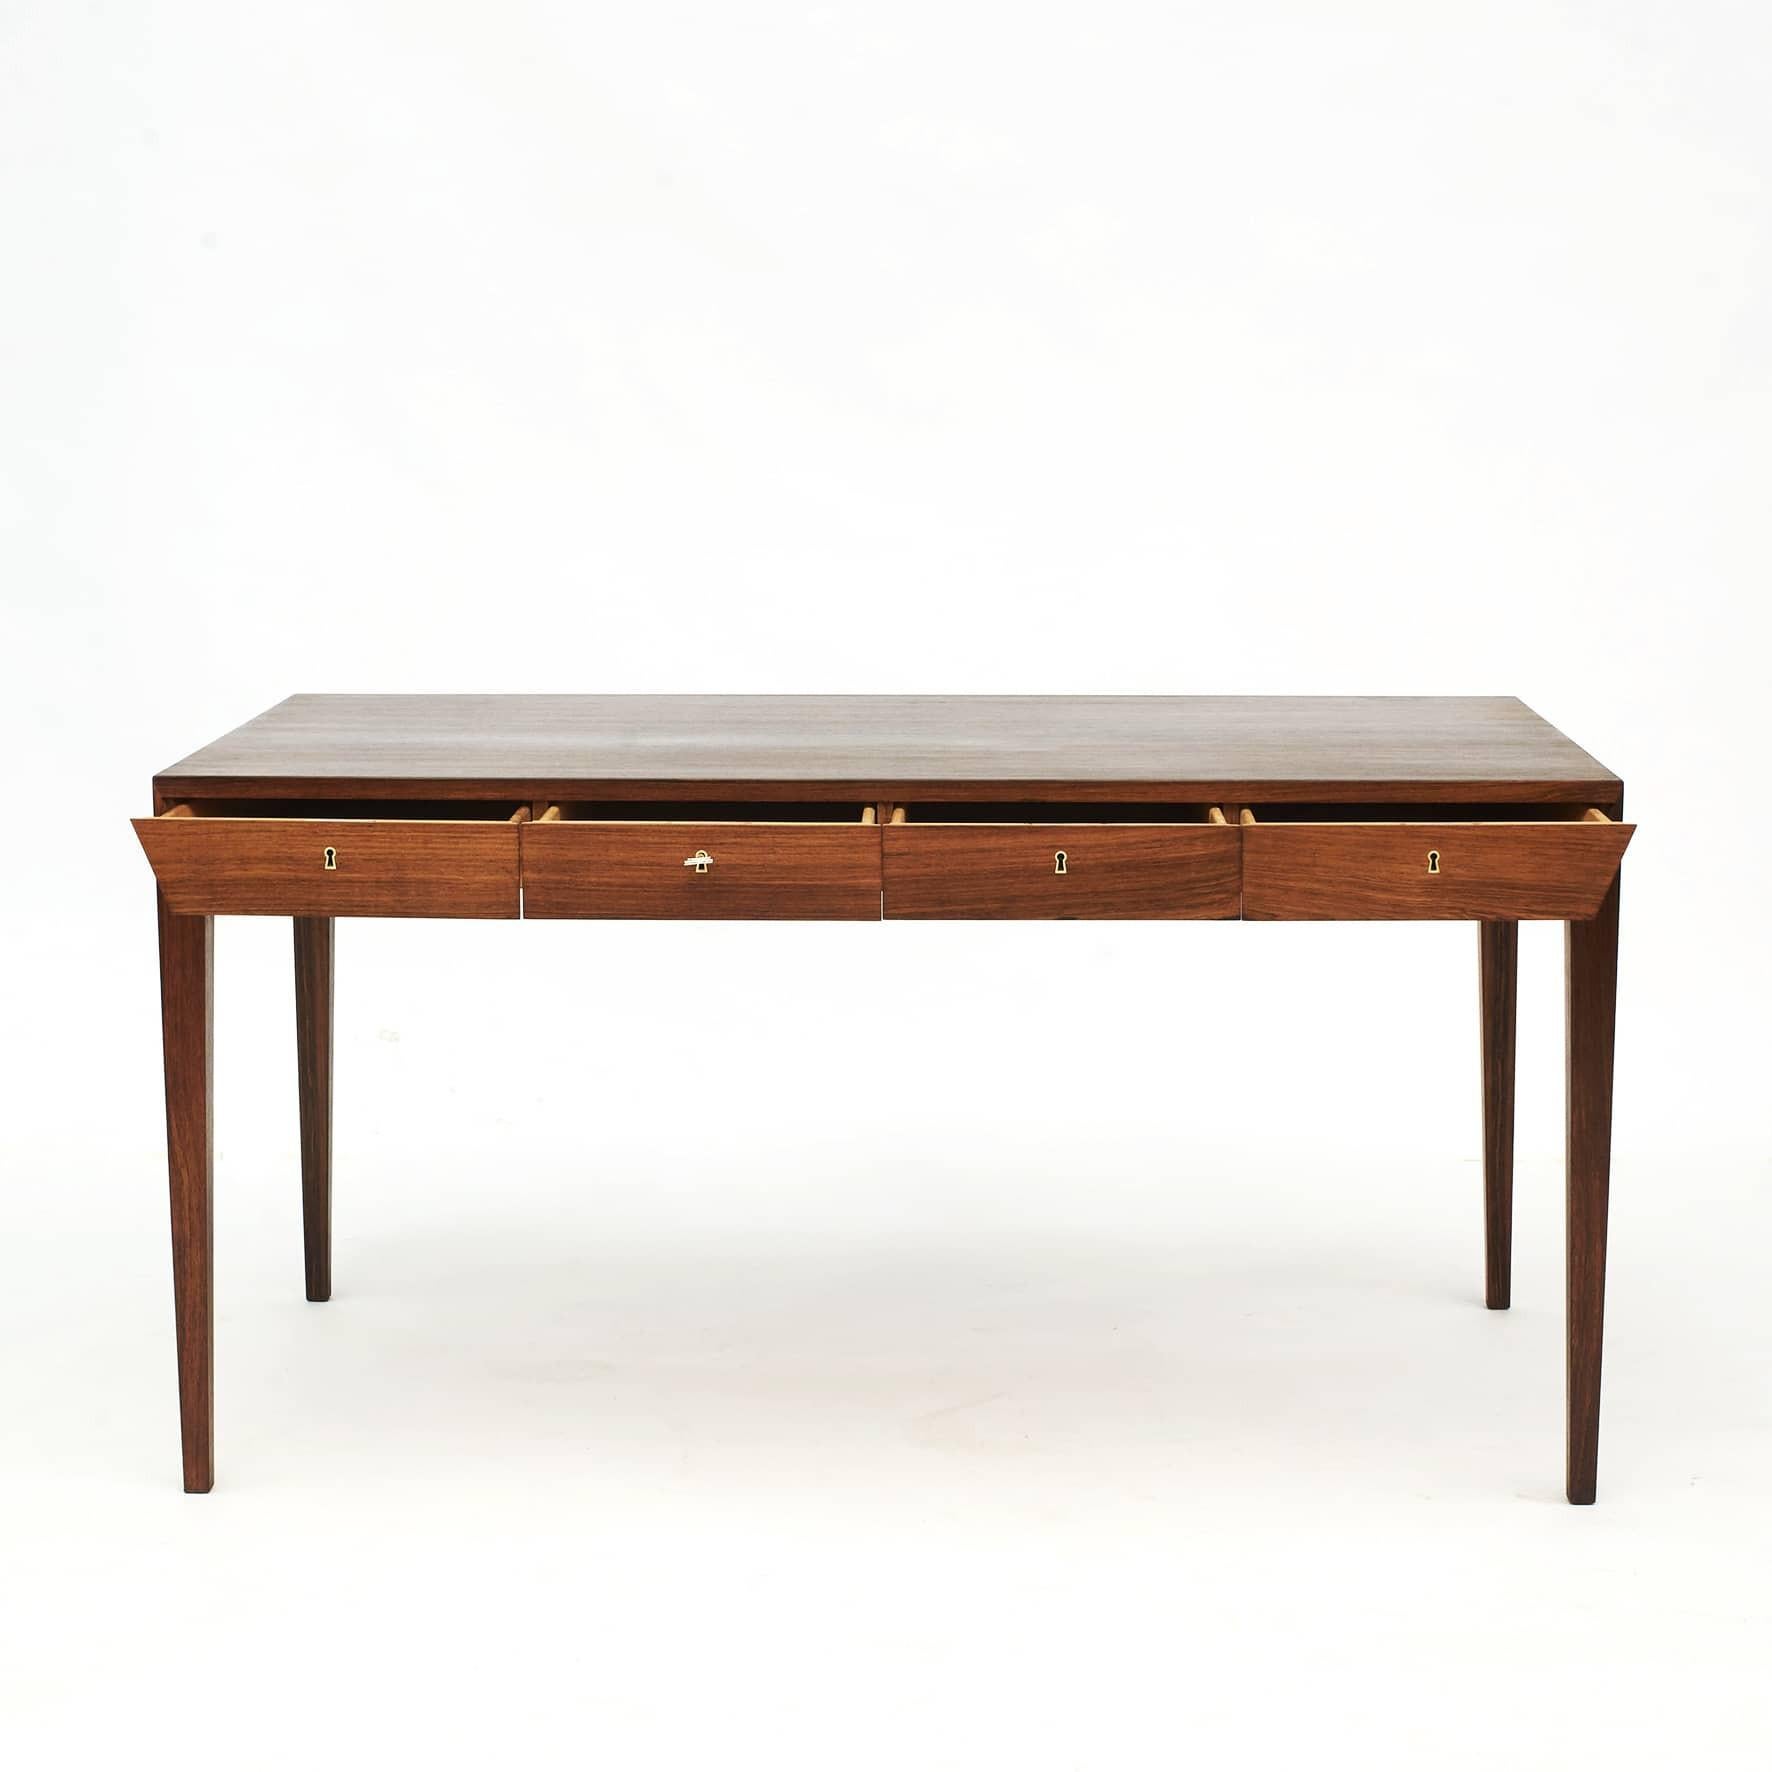 Freestanding Palisander desk designed by Severin Hansen Jr.
Produced by Haslev Møbelsnedkeri in Denmark, 1955-1960.
The desk has been professionally refinished.
In outstanding condition.
  